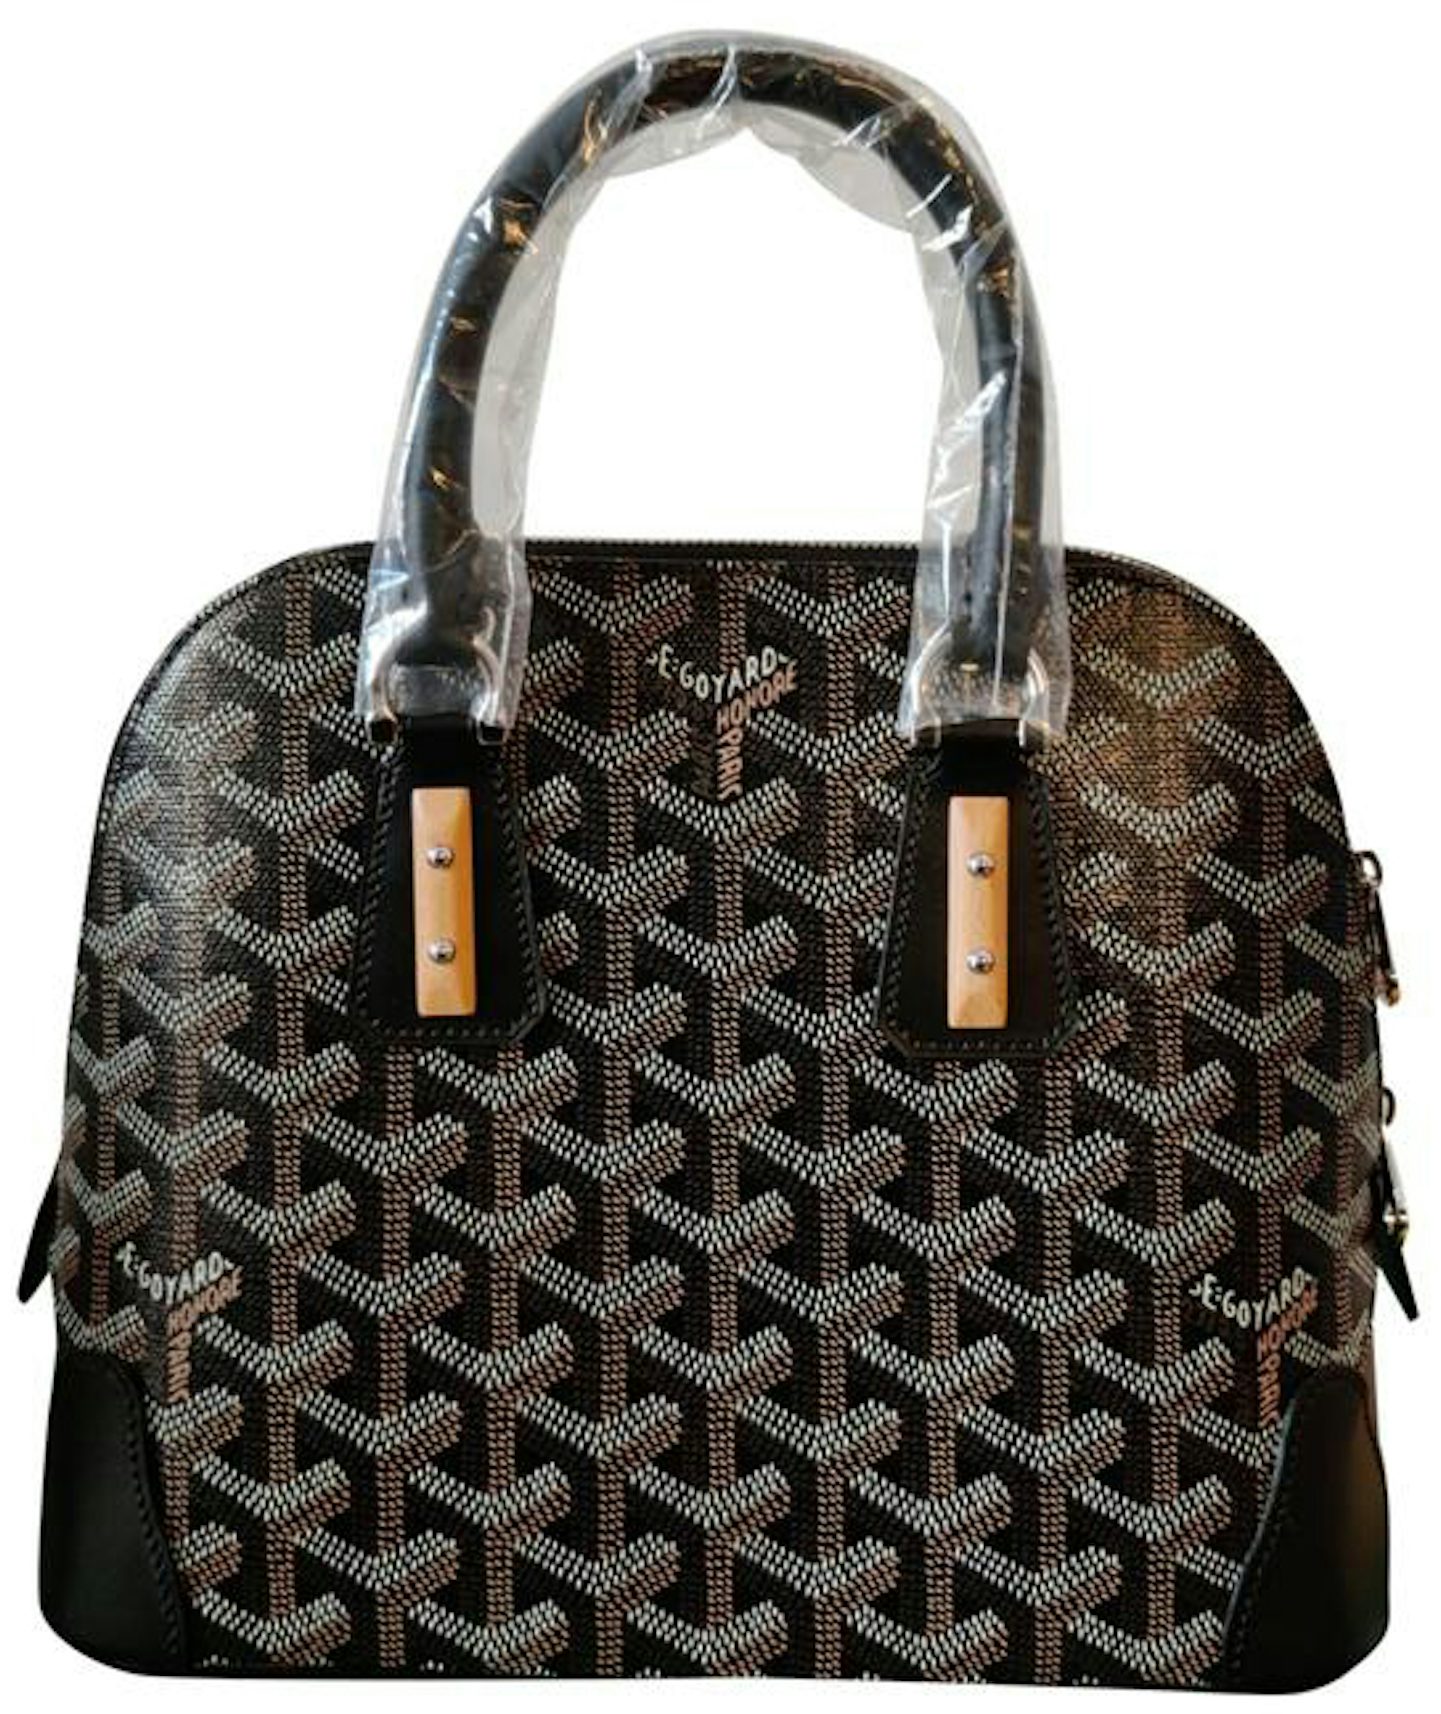 How Much Does a Goyard Bag Cost? - StockX News